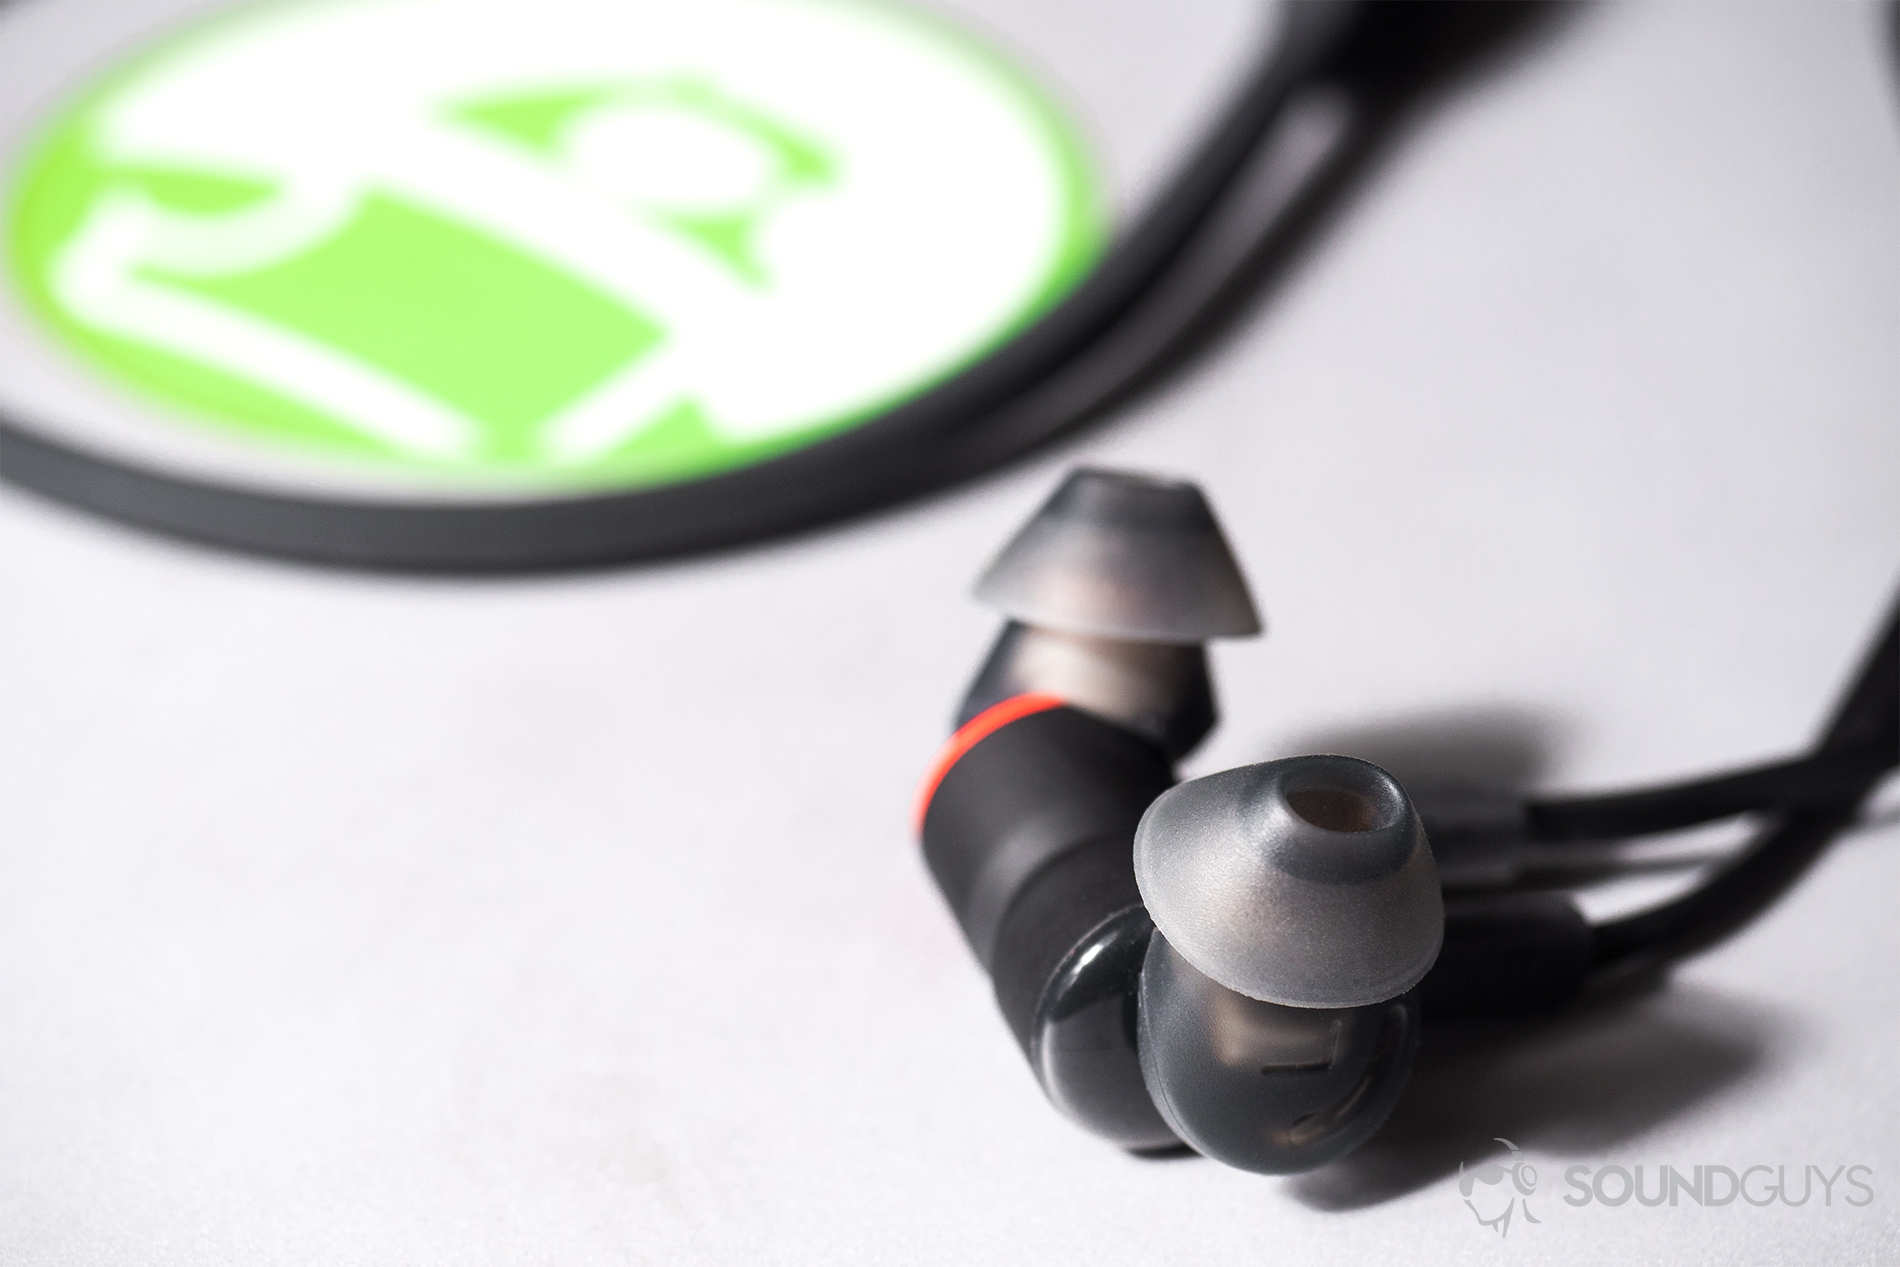 USB-C headphones - Plantronics BackBeat Go 410: Close-up of the earbuds magnetized together on a Microsoft Surface Book with an Android Authority sticker on it.